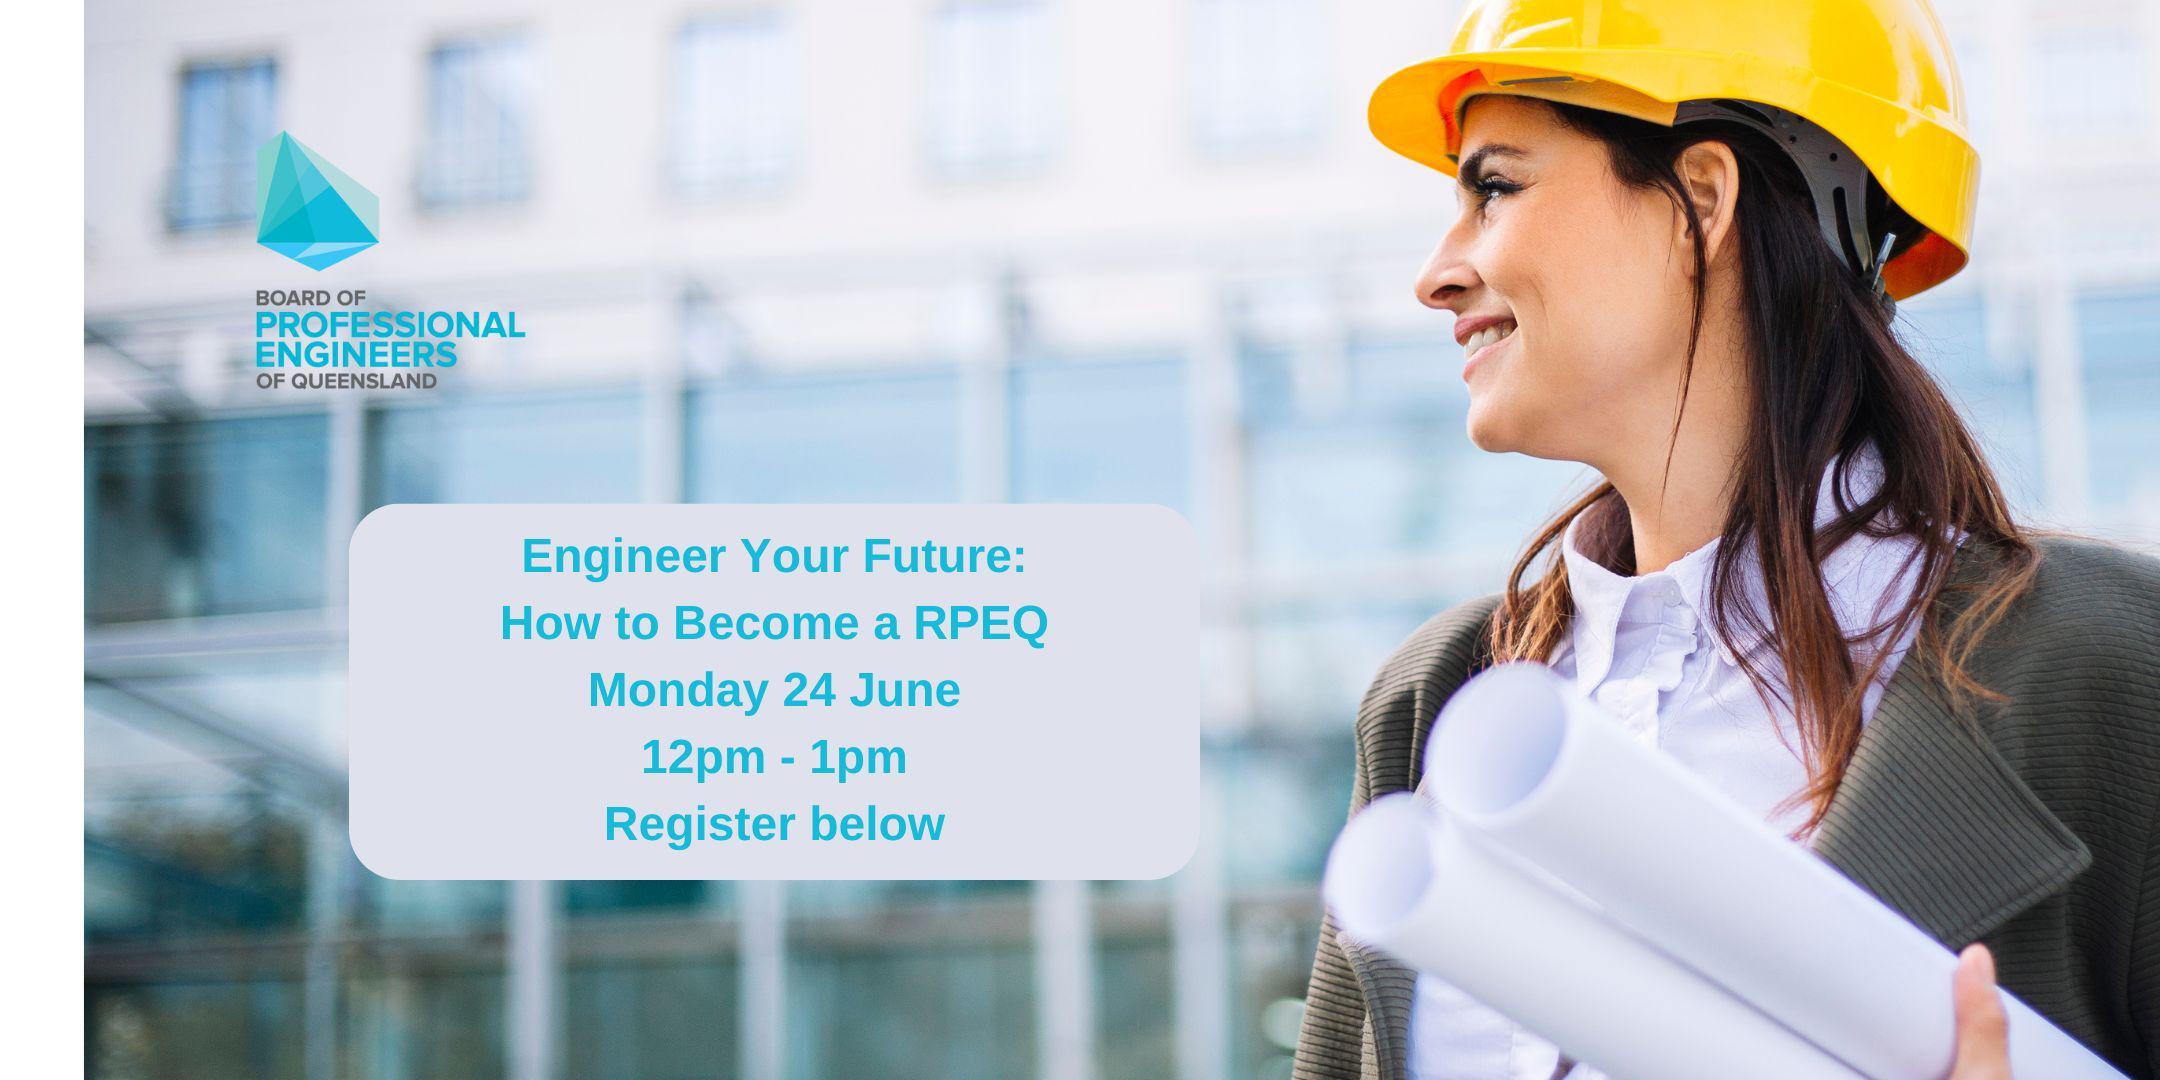 Engineer Your Future: How to Become a RPEQ